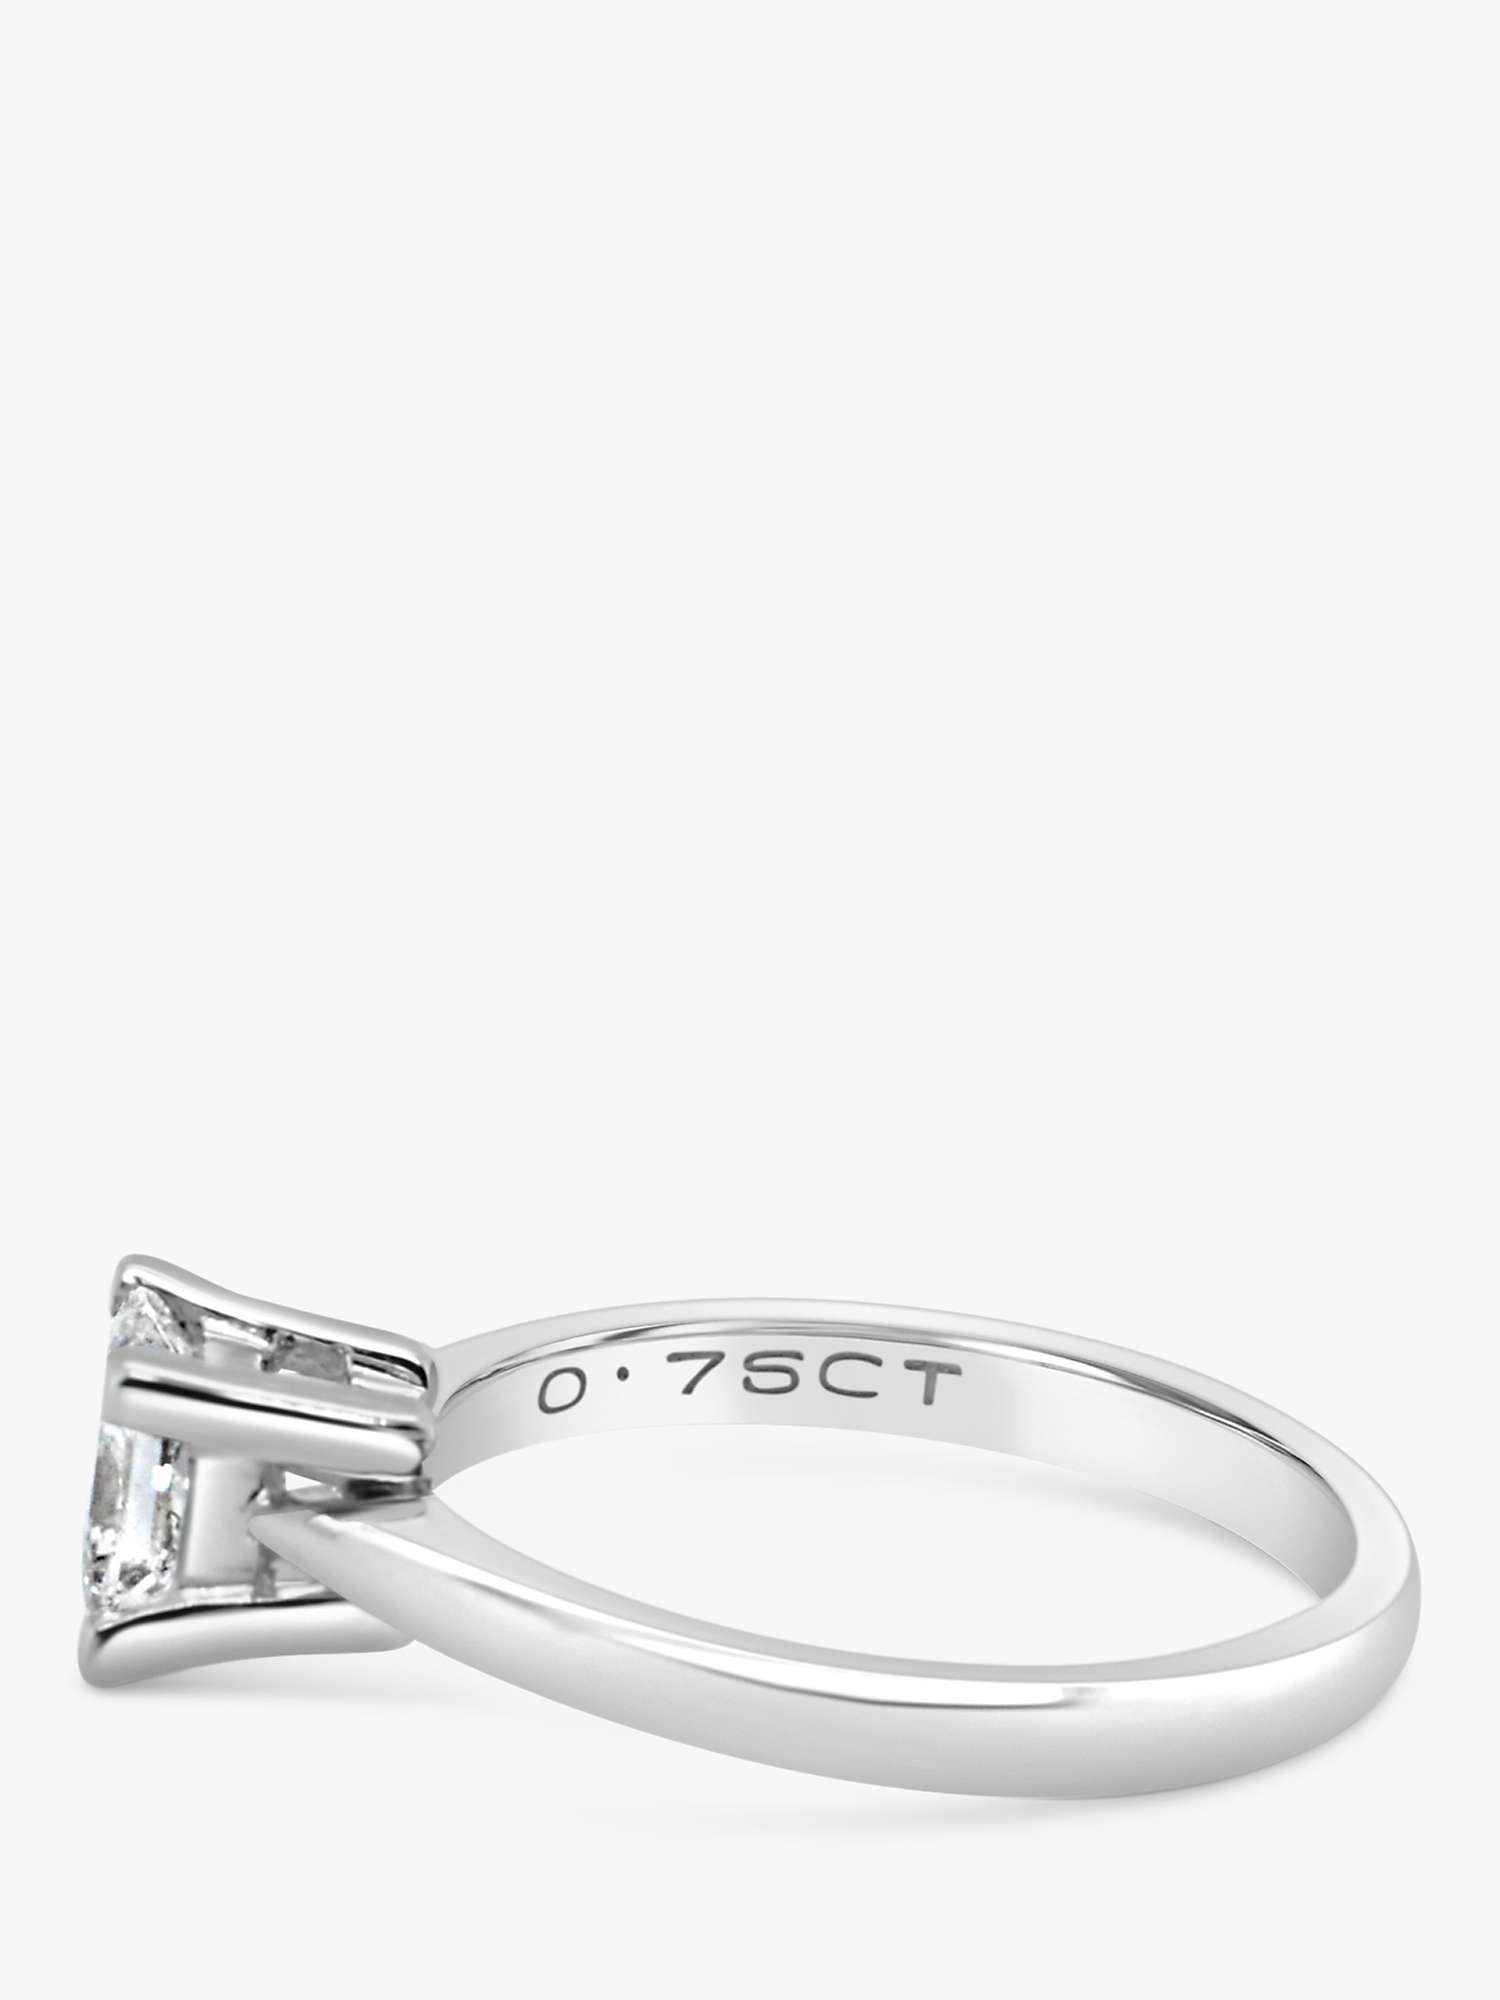 Buy Milton & Humble Jewellery Second Hand 18ct White Gold Princess Cut Diamond Engagement Ring Online at johnlewis.com